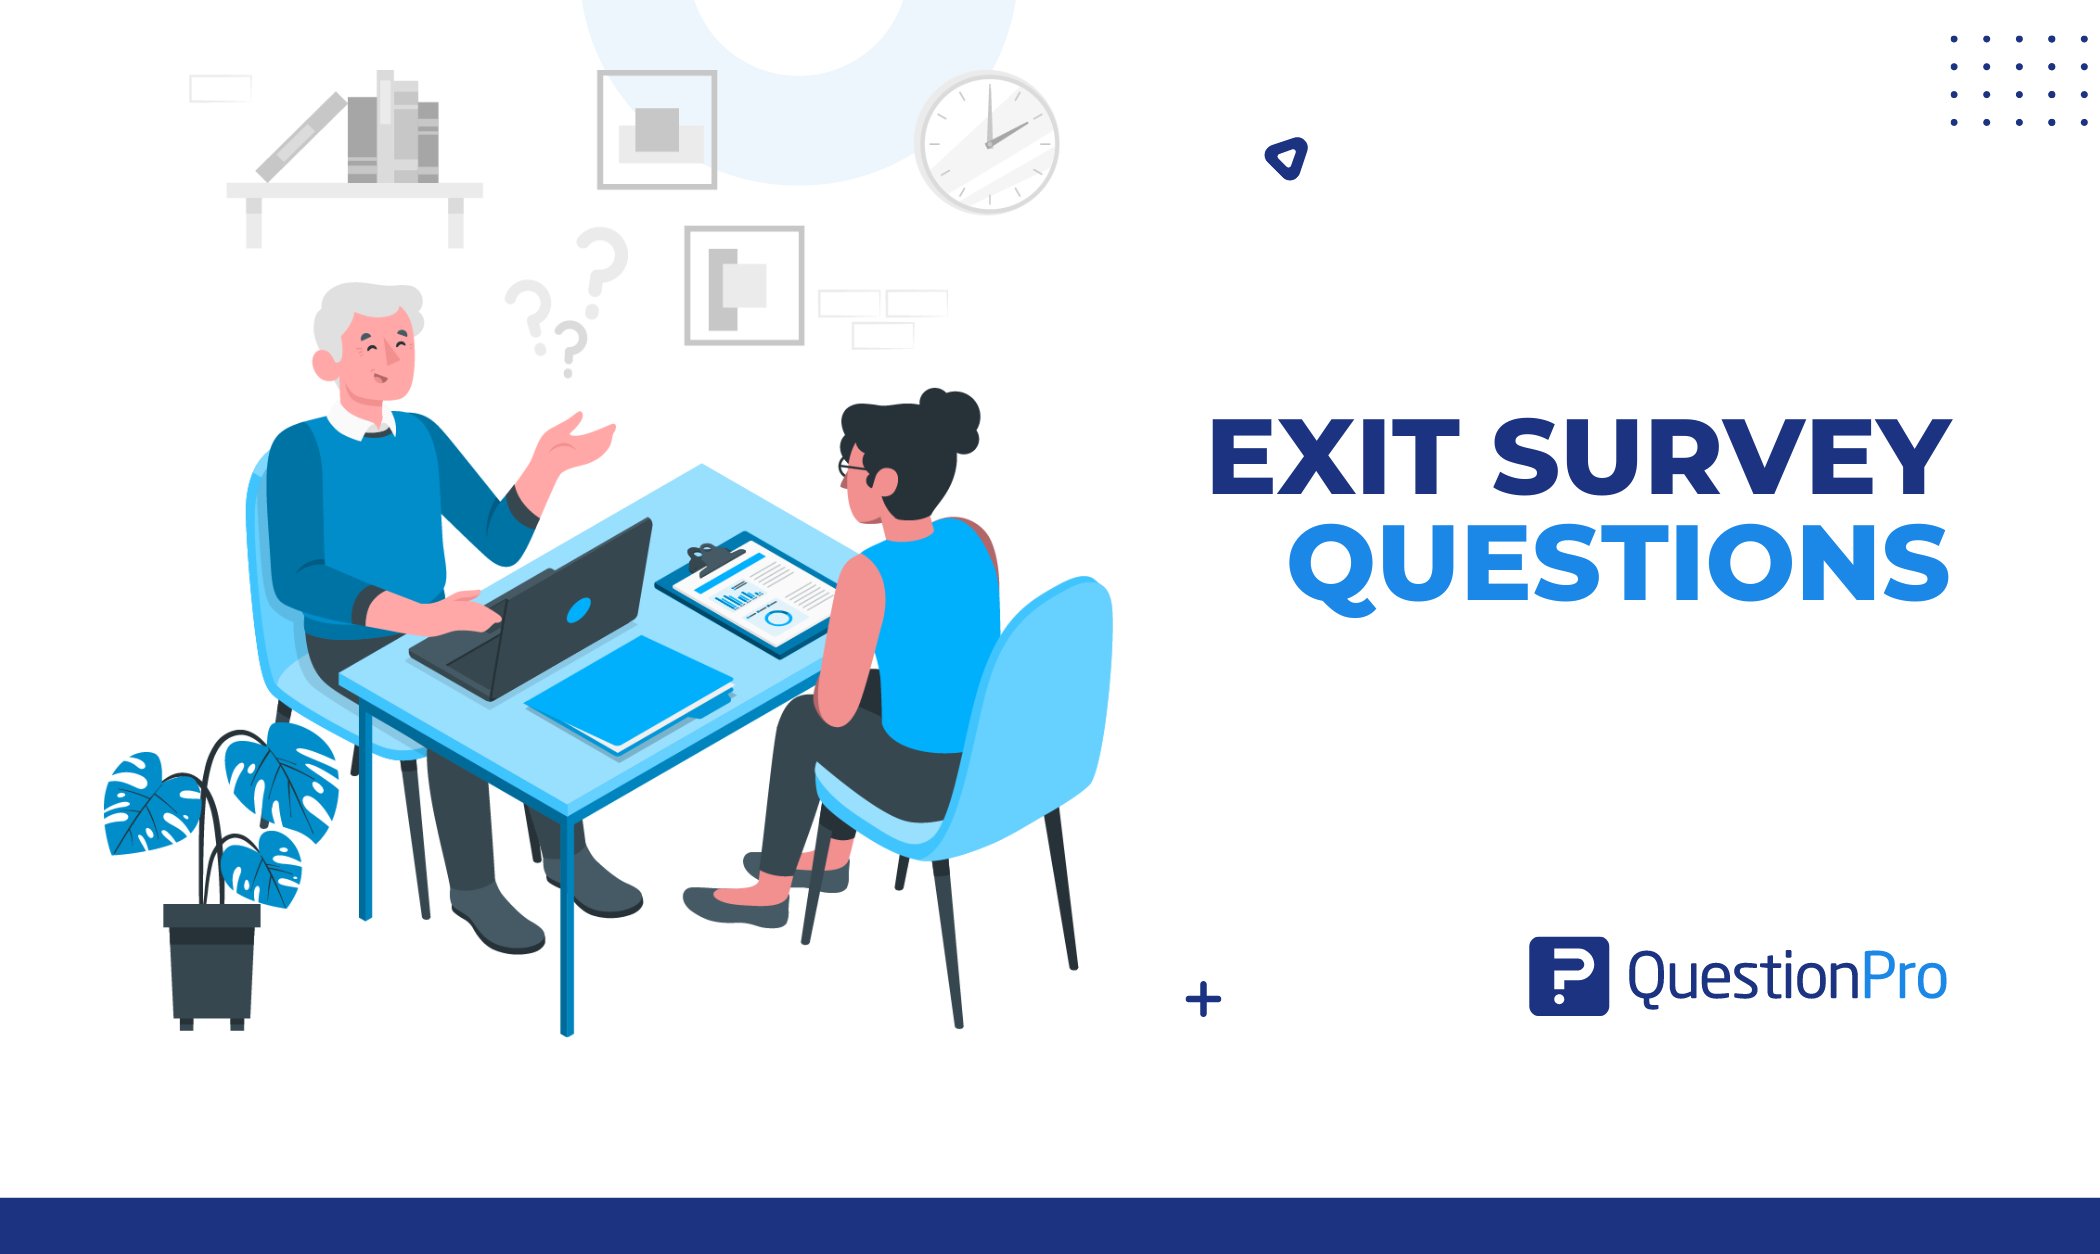 Exit Interviews and What Questions to Aks - Qualtrics